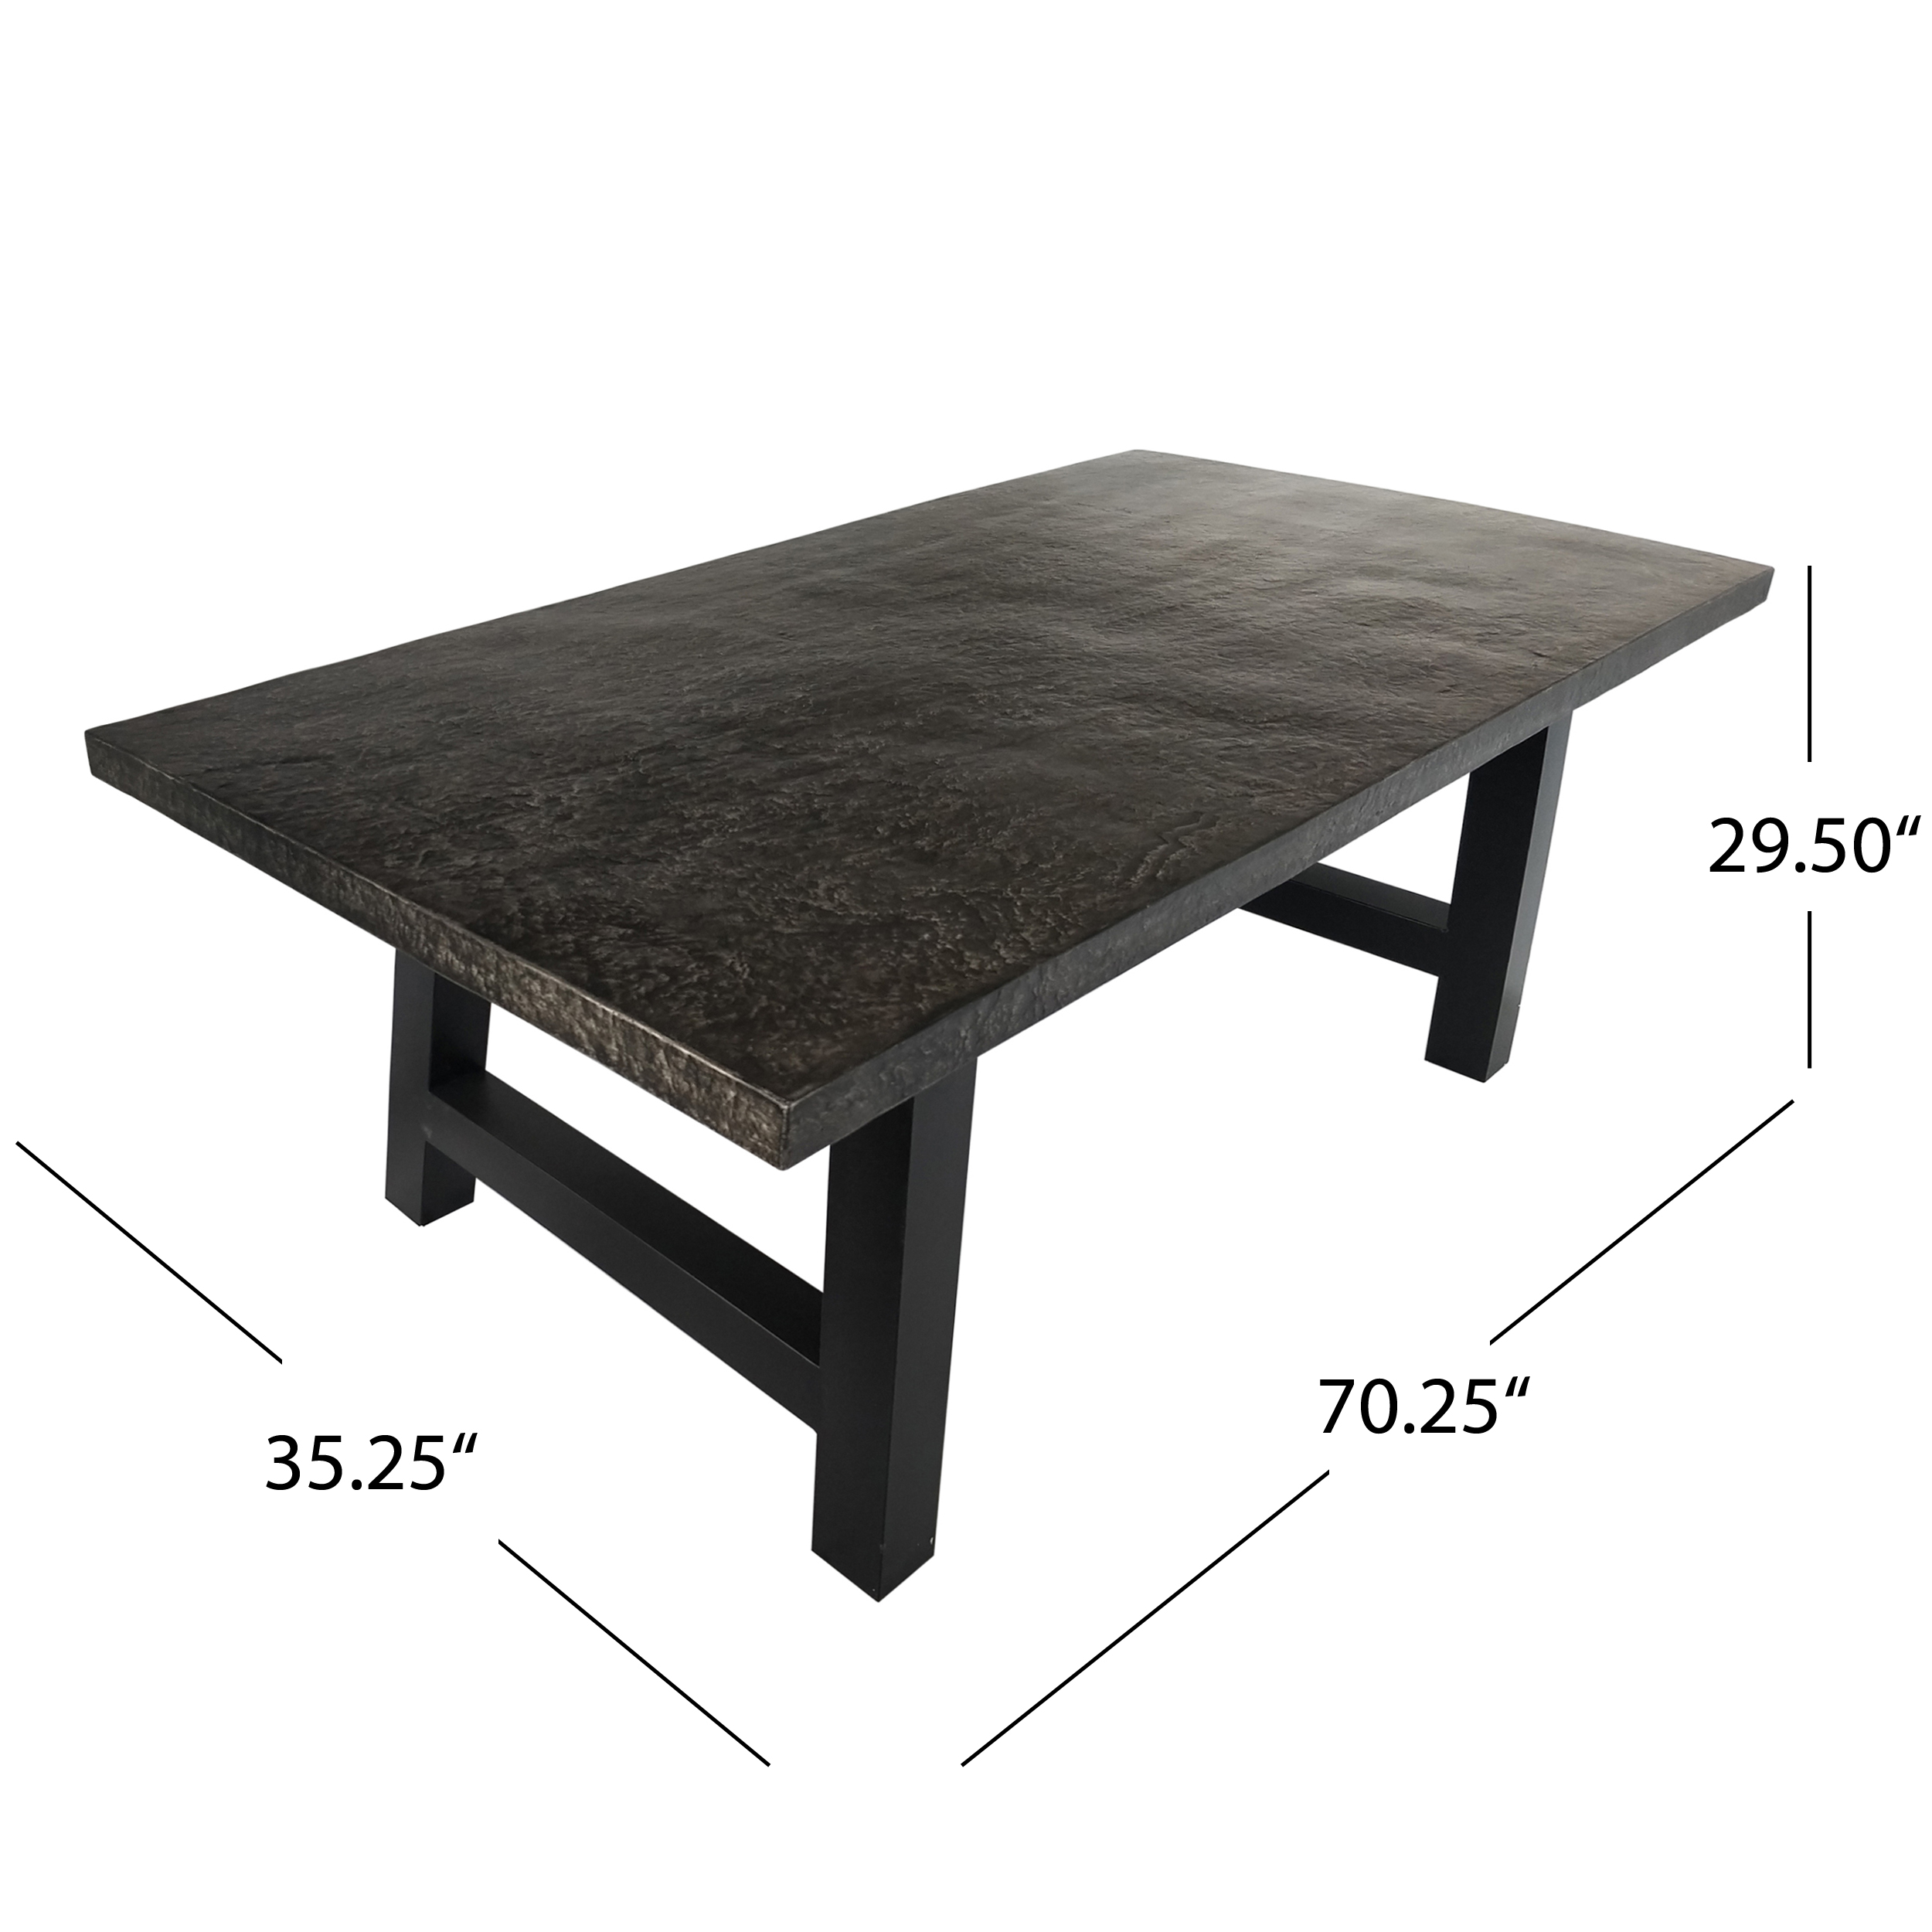 Gianni Outdoor Light Weight Concrete Dining Table, Stone Grey, Black - image 3 of 7